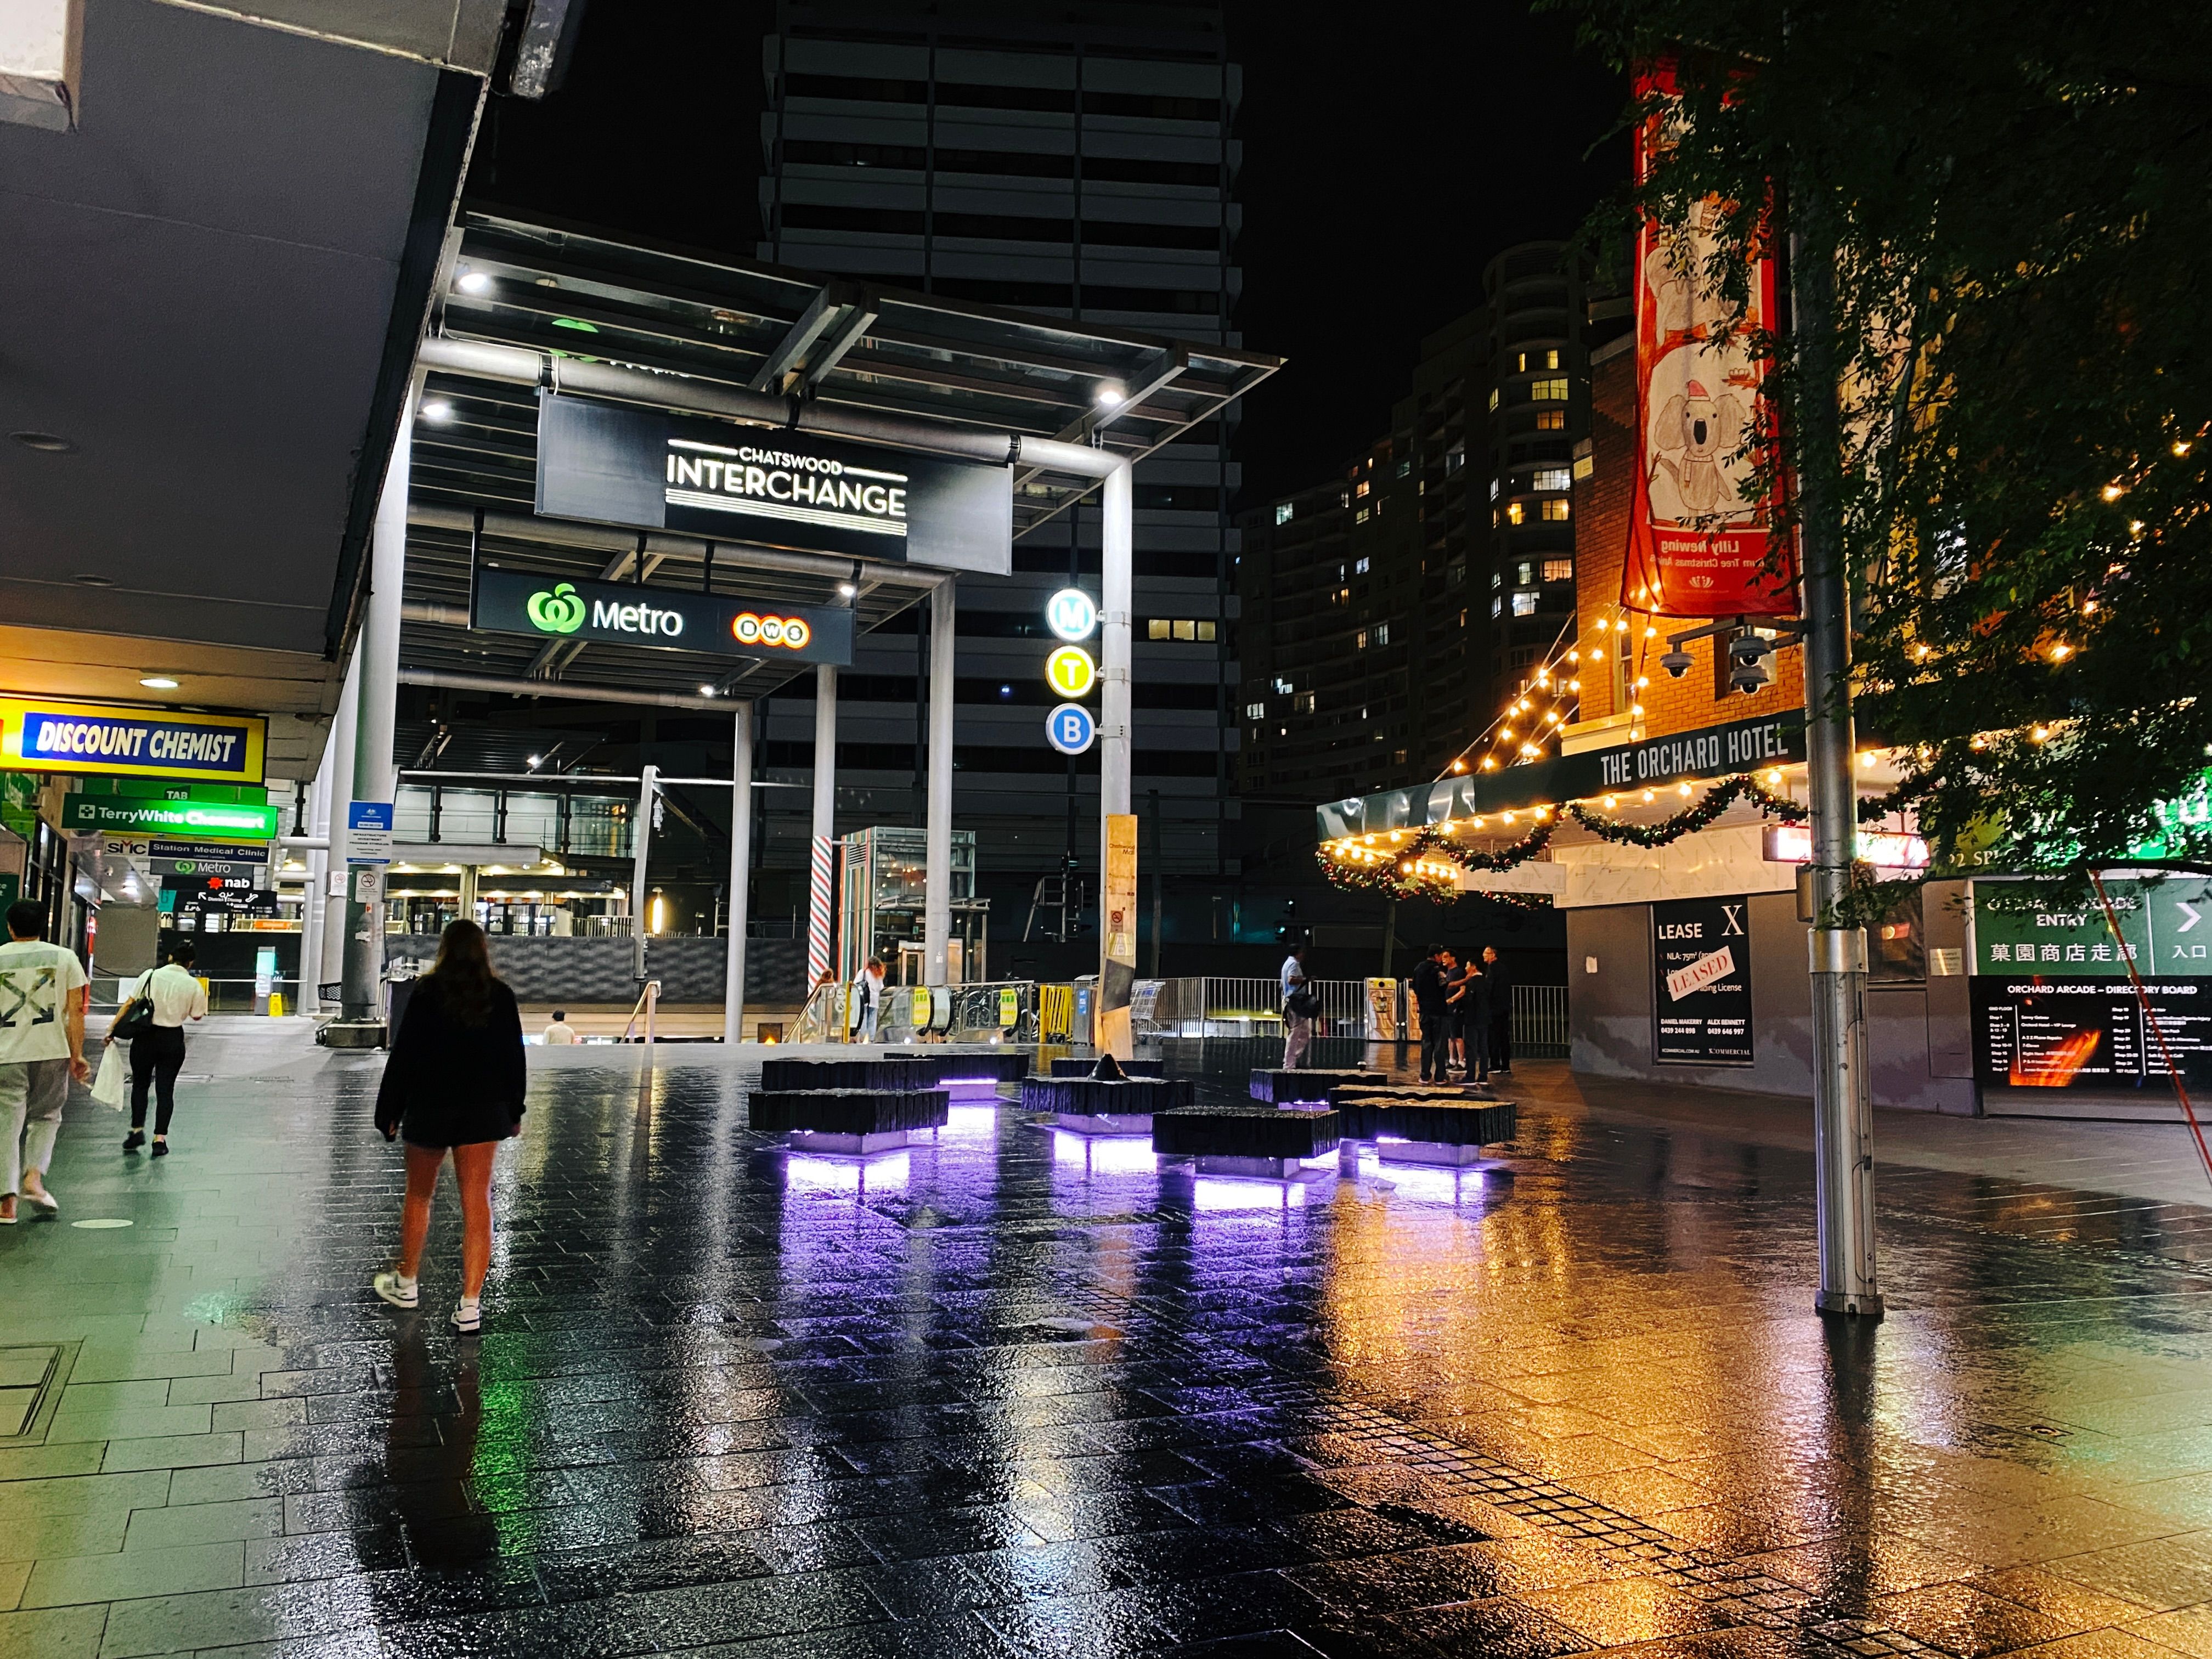 A night-time photo looking at the big entrance arch to Chatswood Interchange where the train station is. It's been raining and there's lots of wonderful reflections of lights on the ground.